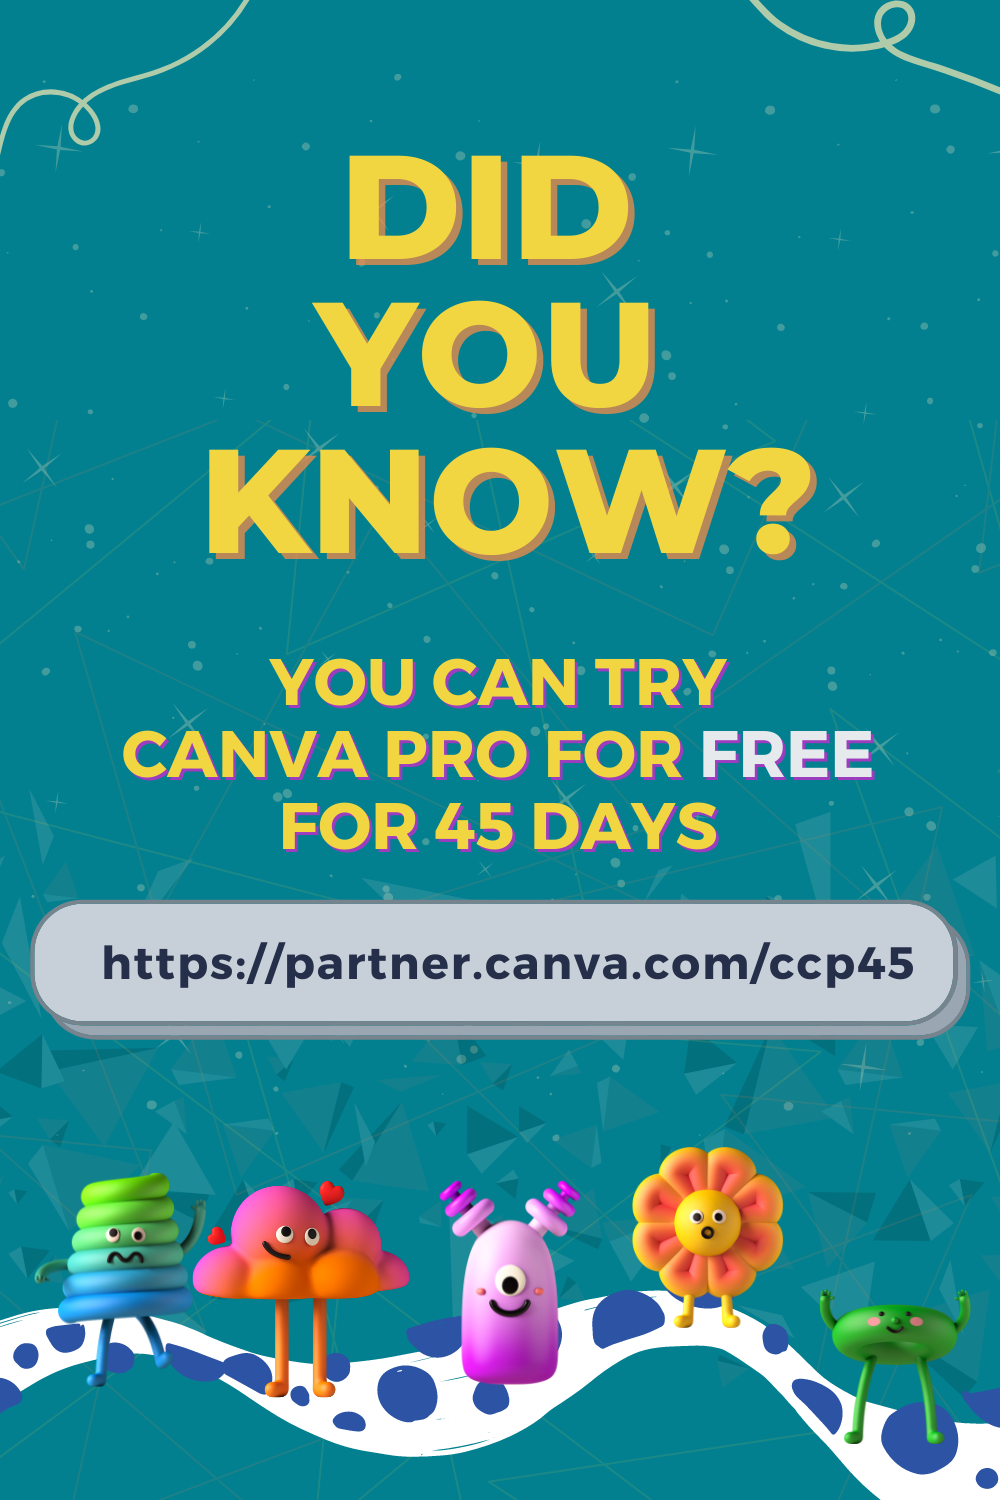 Canva Pro Free Trial for 45 Days